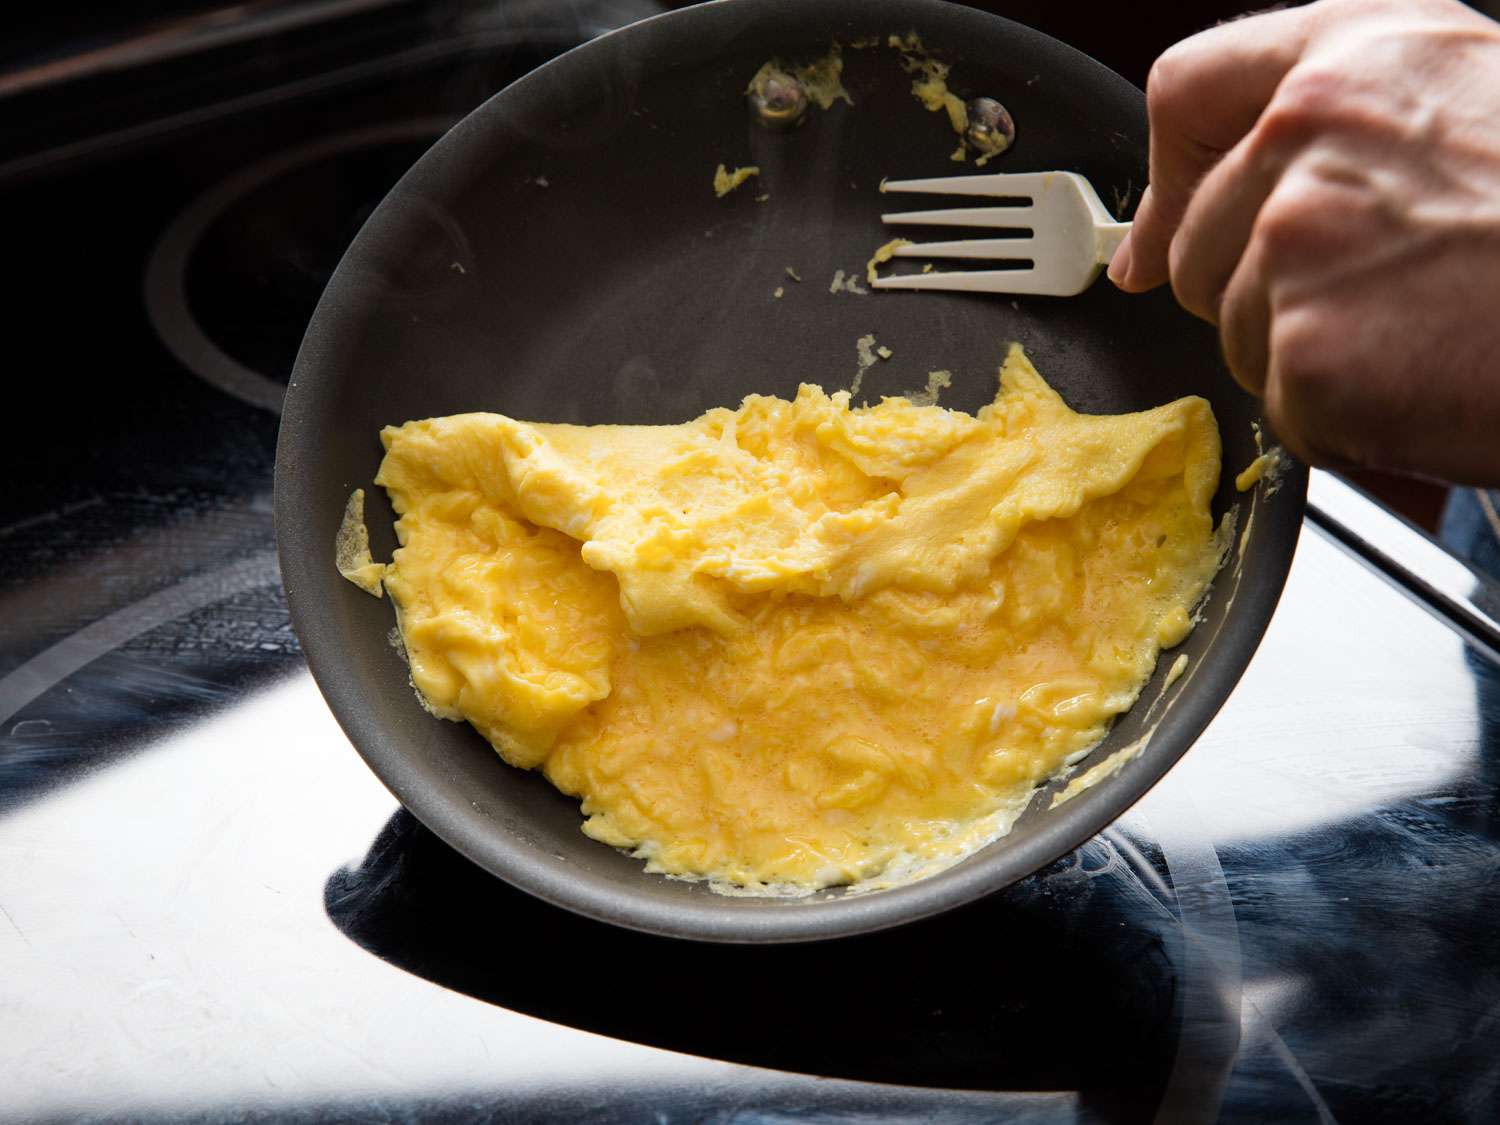 Using a plastic fork to roll the edge of scrambled eggs with large curds toward the center of a nonstick skillet